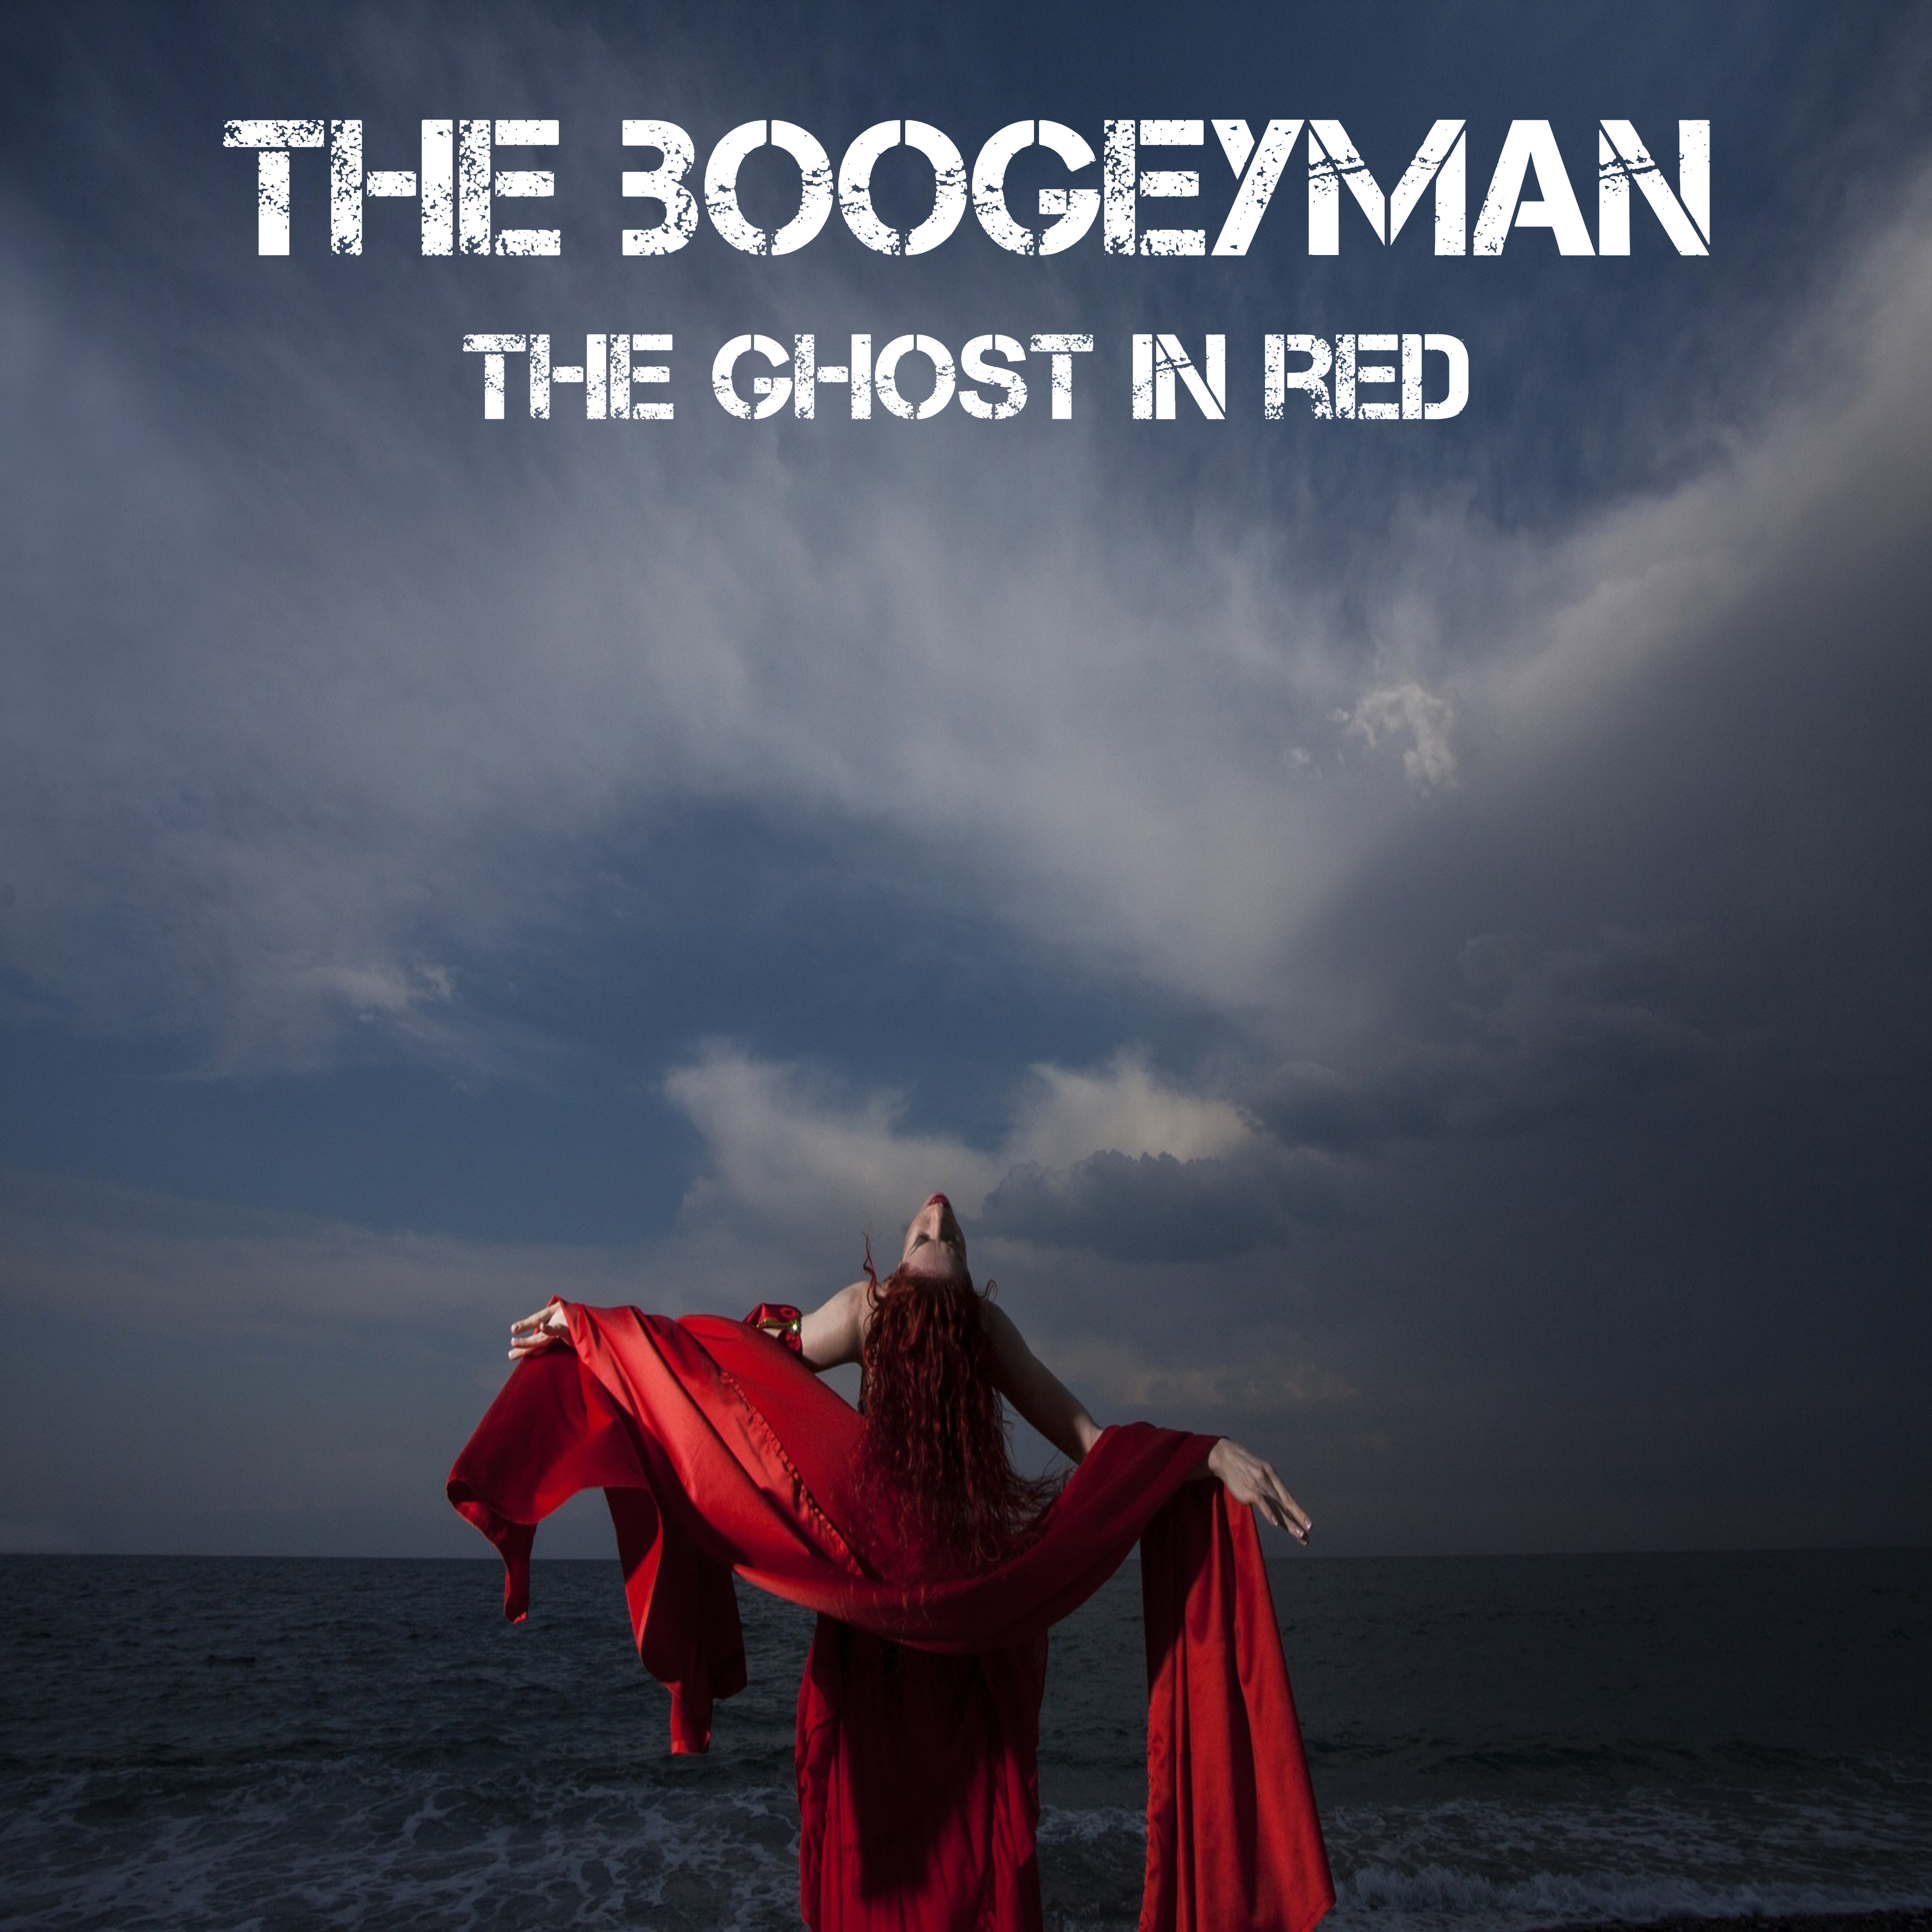 The Ghost in Red